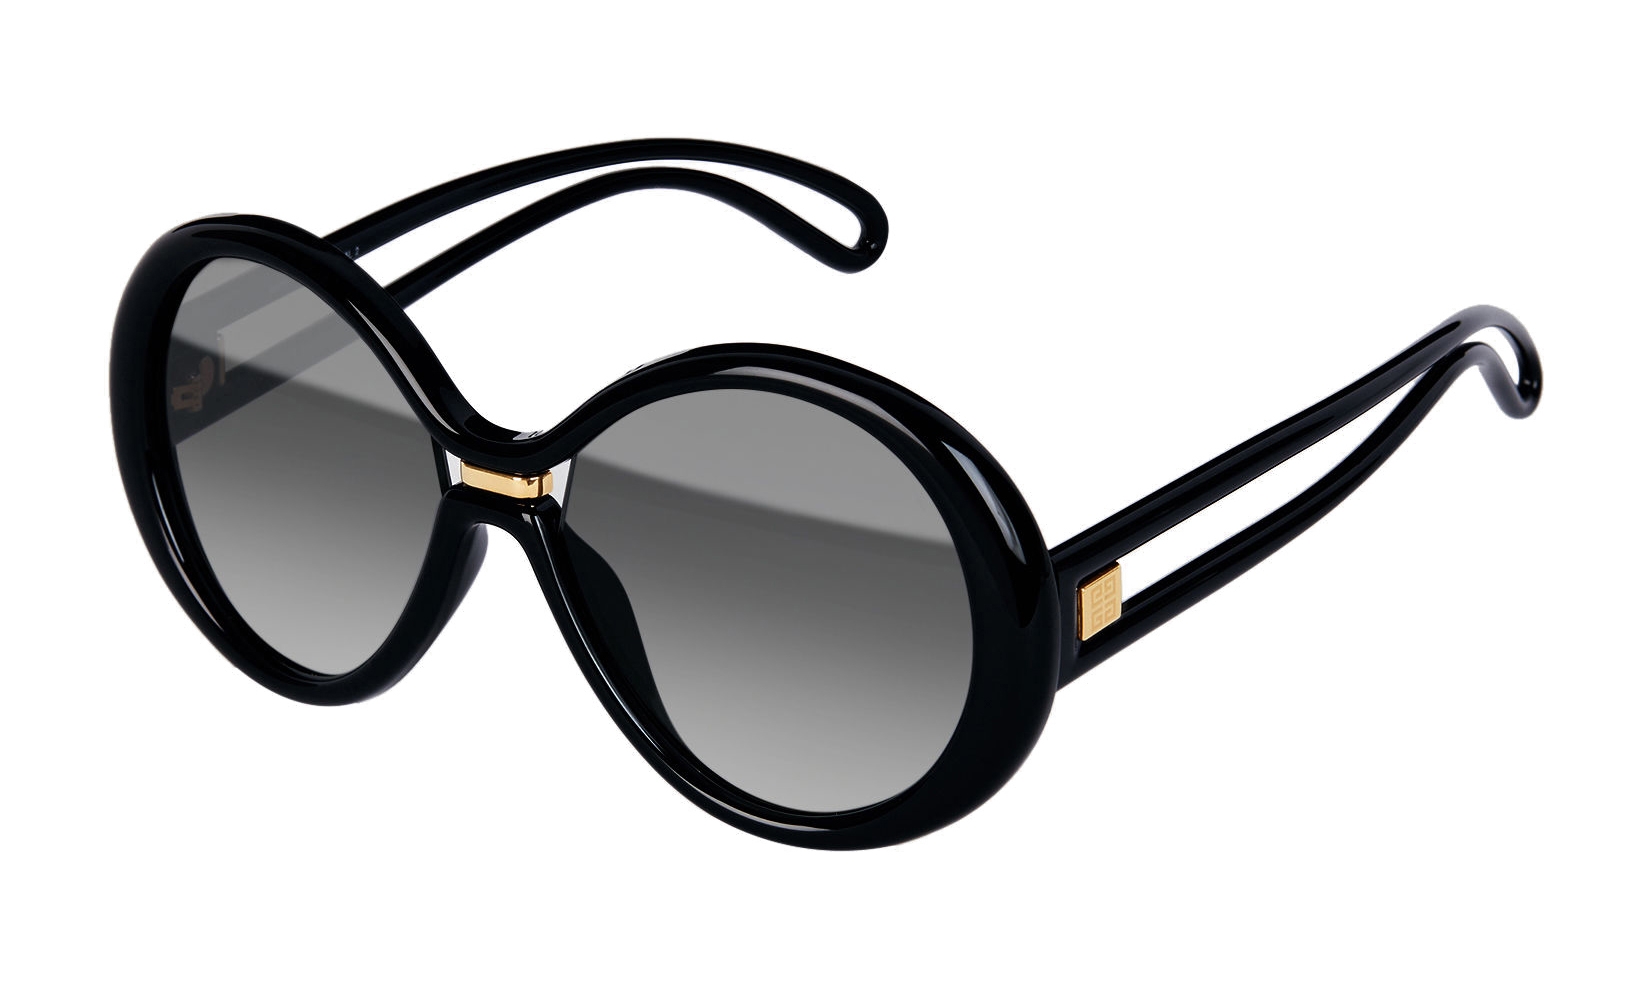 Givenchy - Sunglasses Round Oversize Silhouette in Optyl - Black -  Sunglasses - Givenchy Eyewear - Avvenice